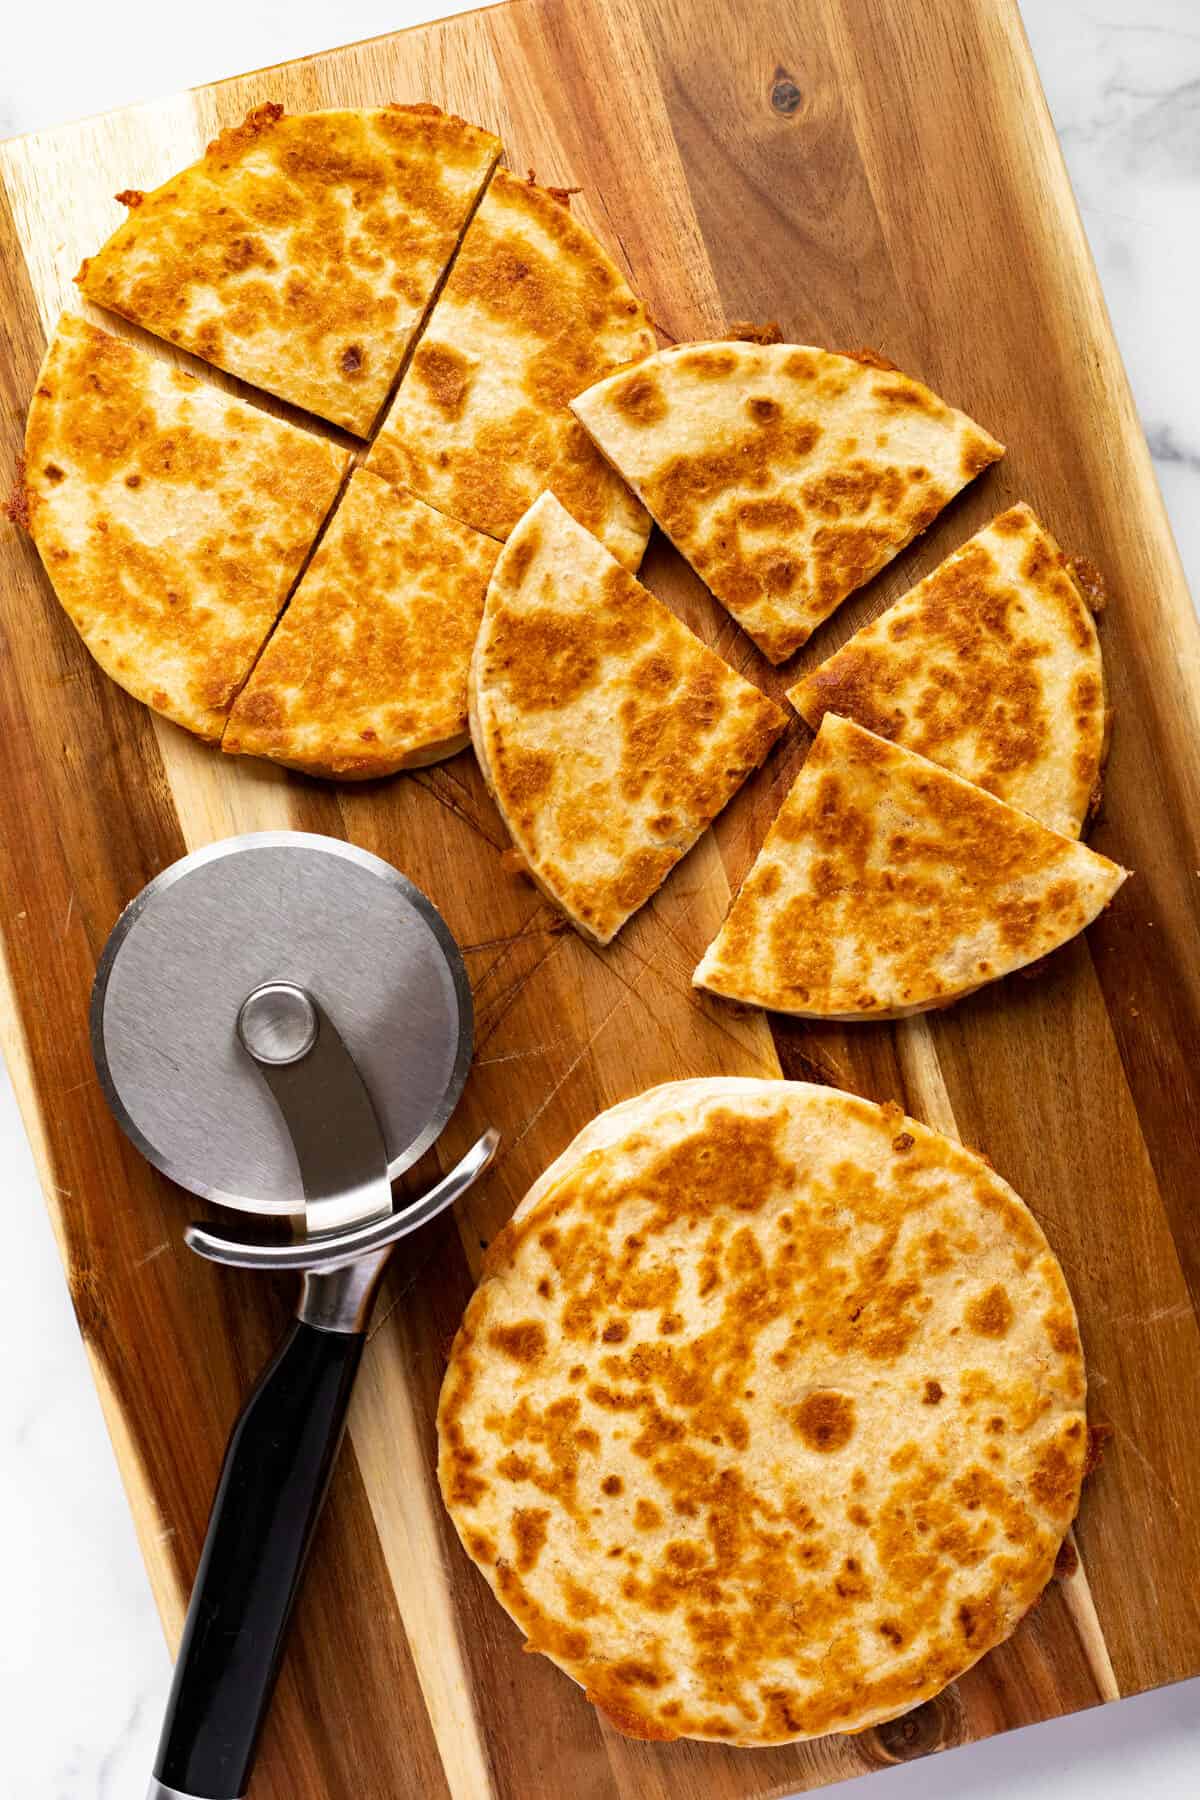 Wooden cutting board with three homemade cheese quesadillas